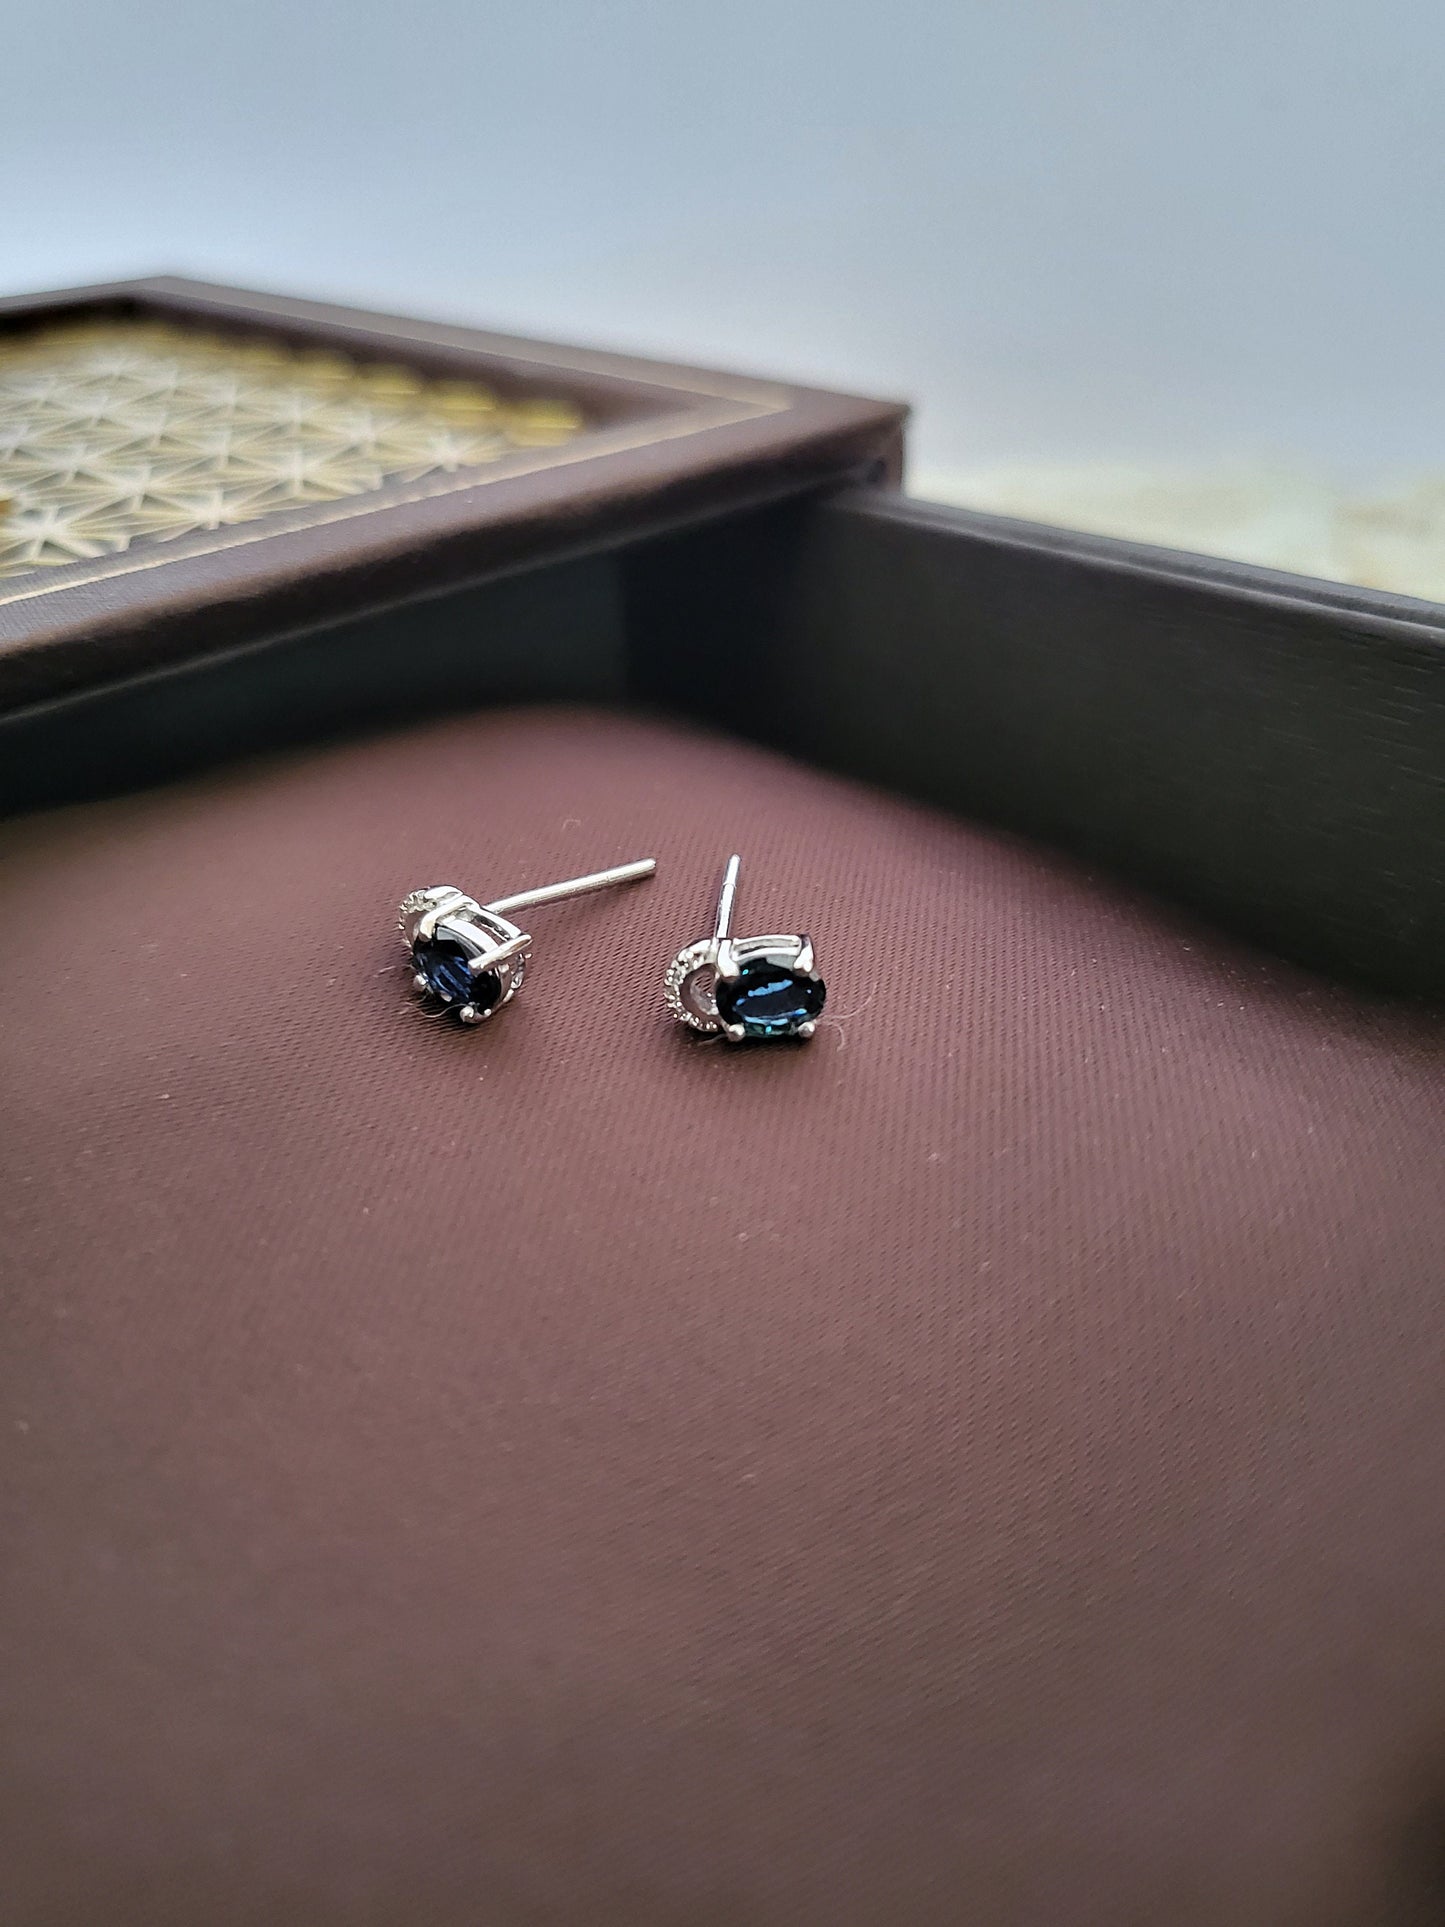 Natural Blue Sapphire Rare Gemstone Earrings with Cubic Zirconia Stud Silver Earrings